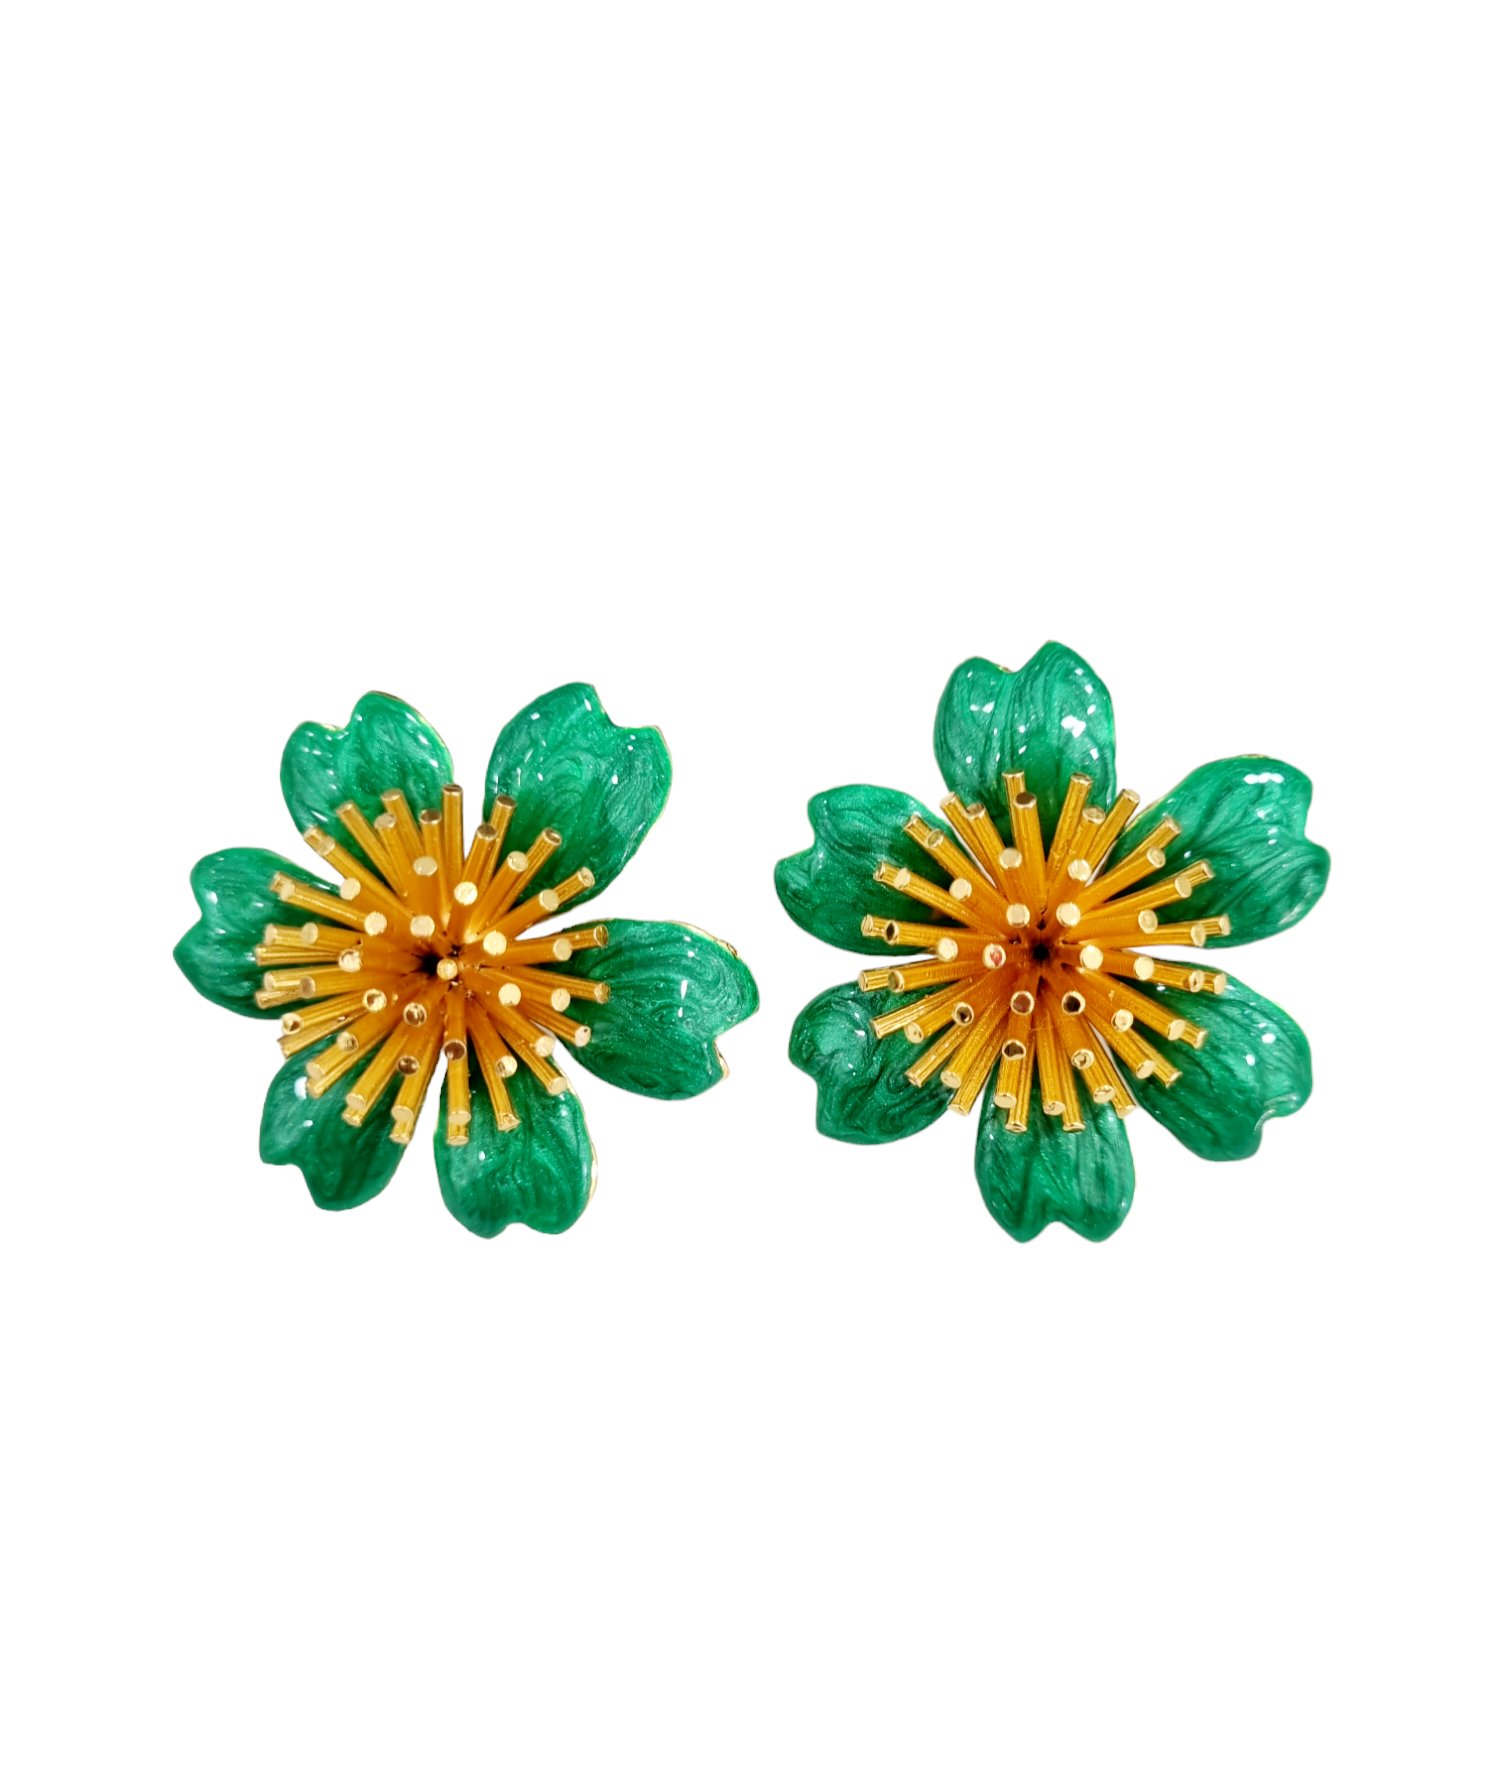 Lobe earrings made with green enamelled brass flowers Weight 15g Length 2cm Size 4cm